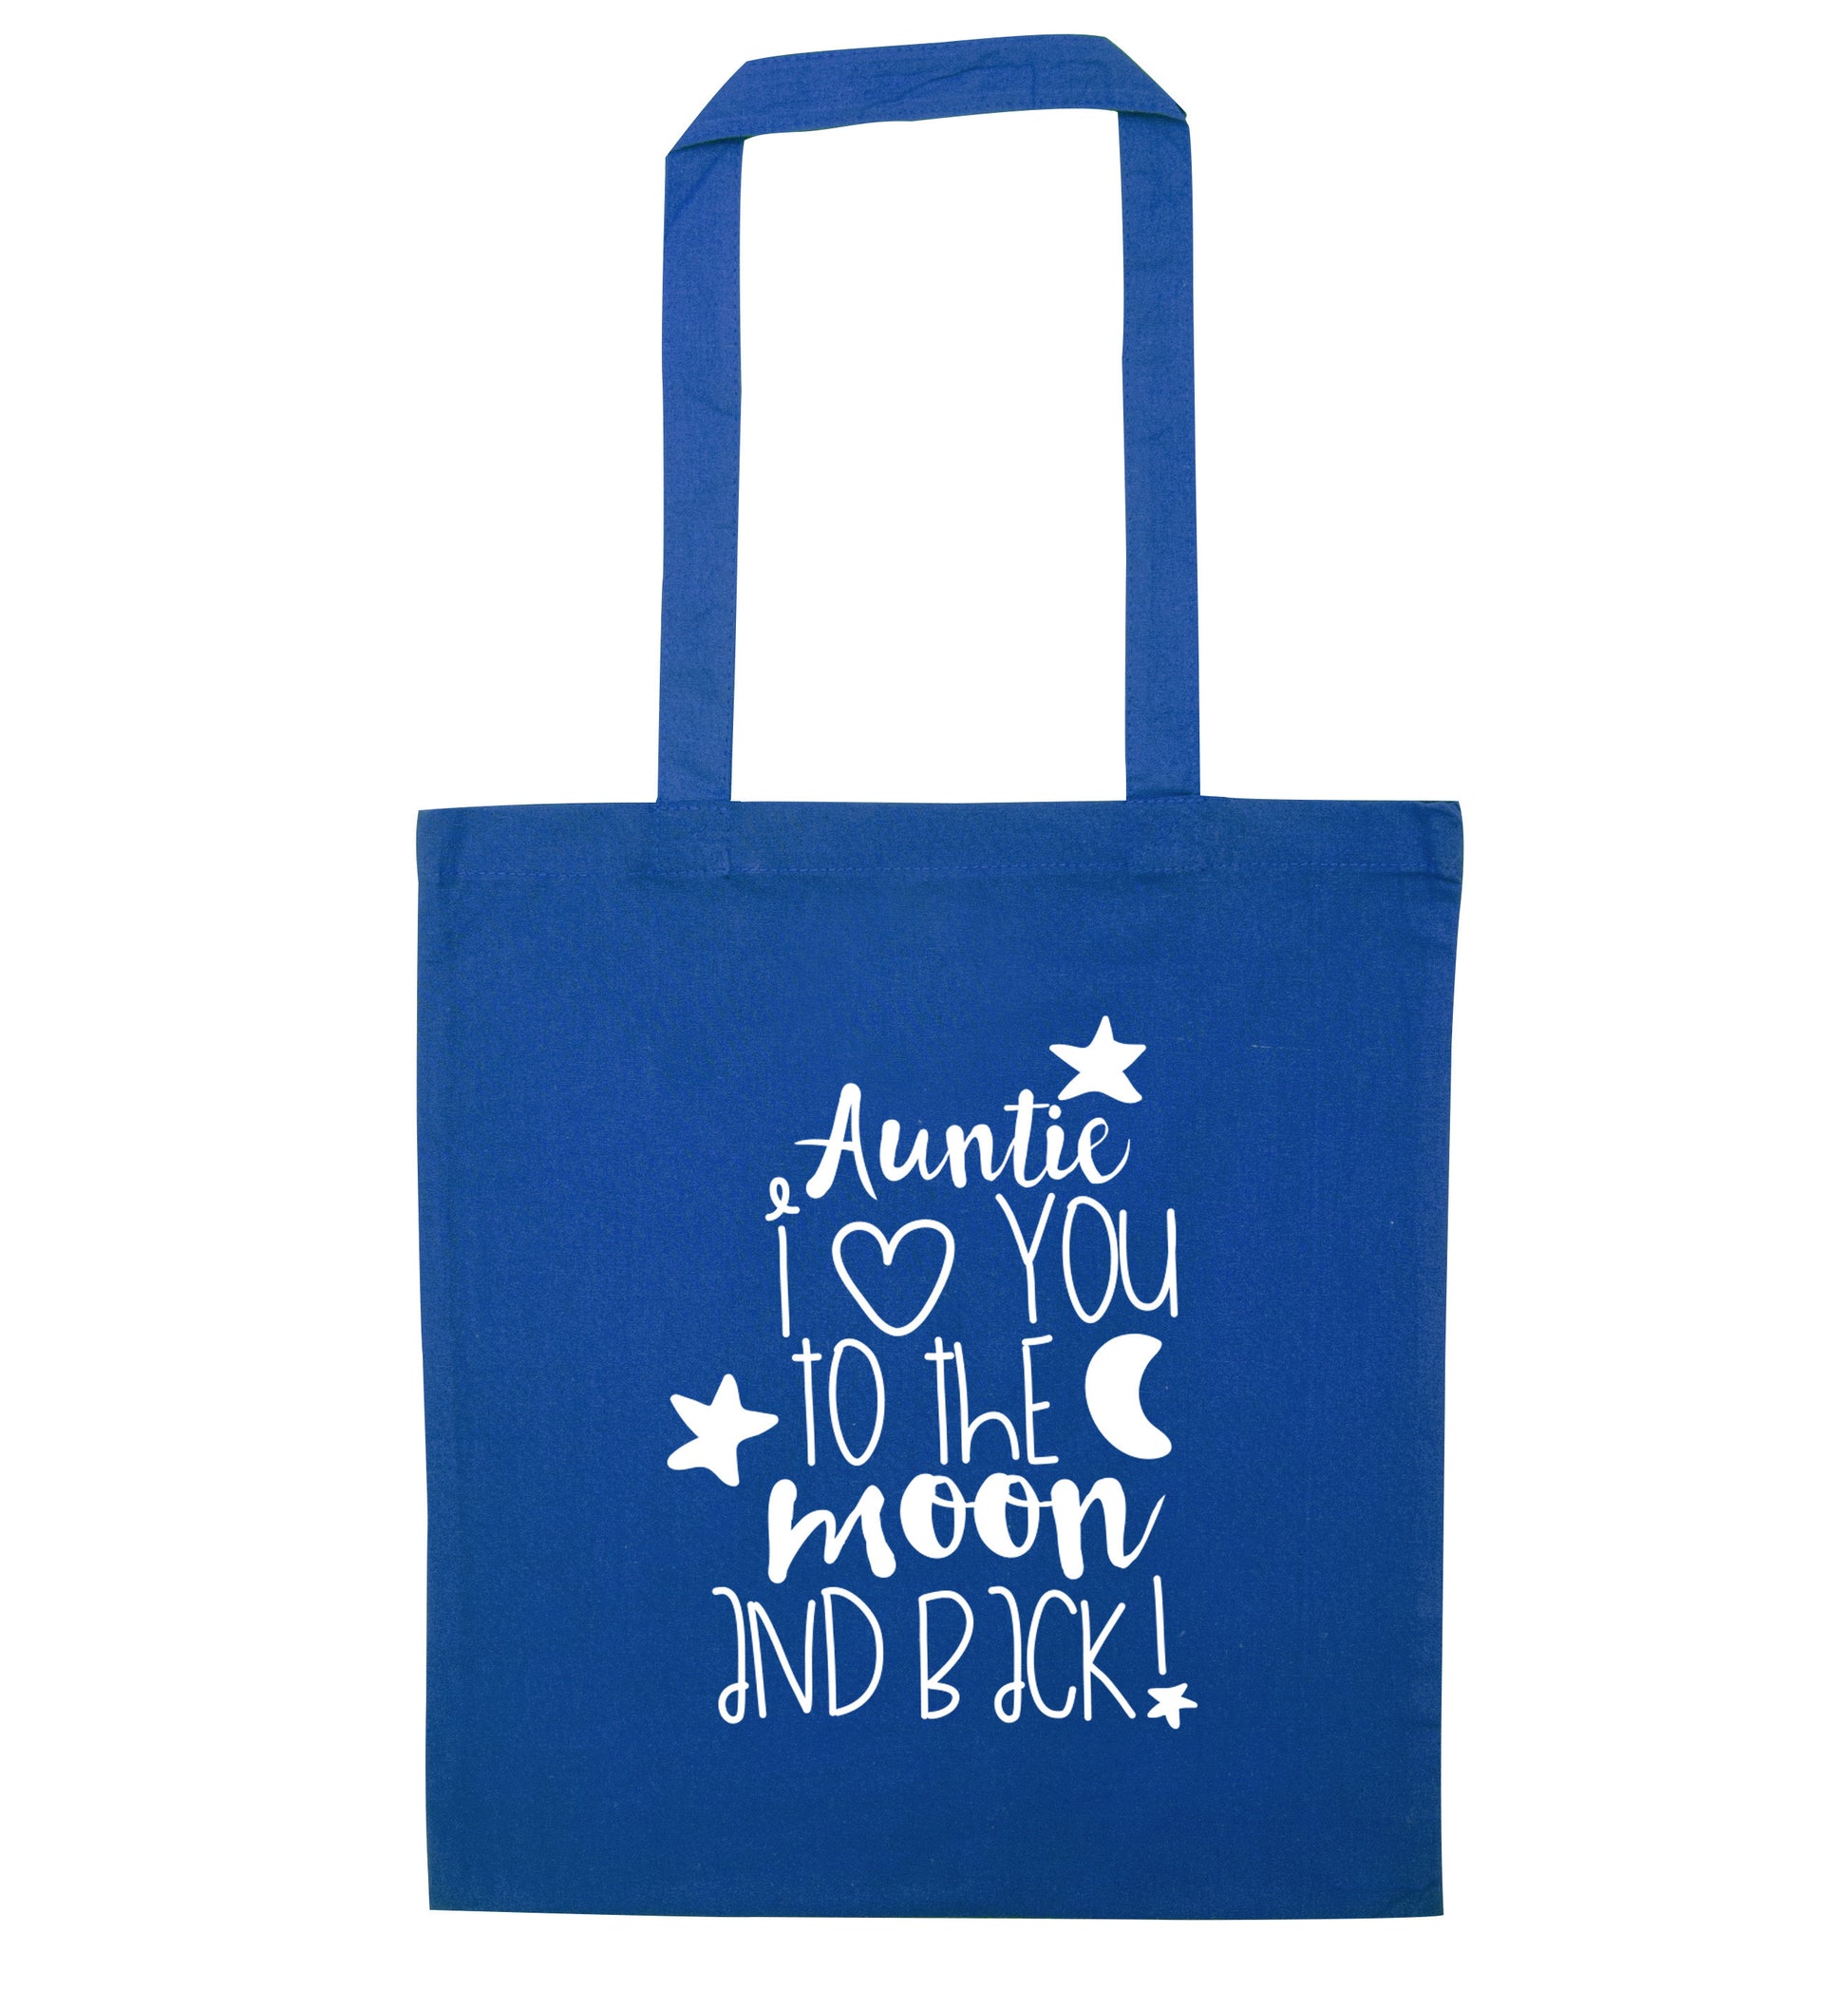 Auntie I love you to the moon and back blue tote bag